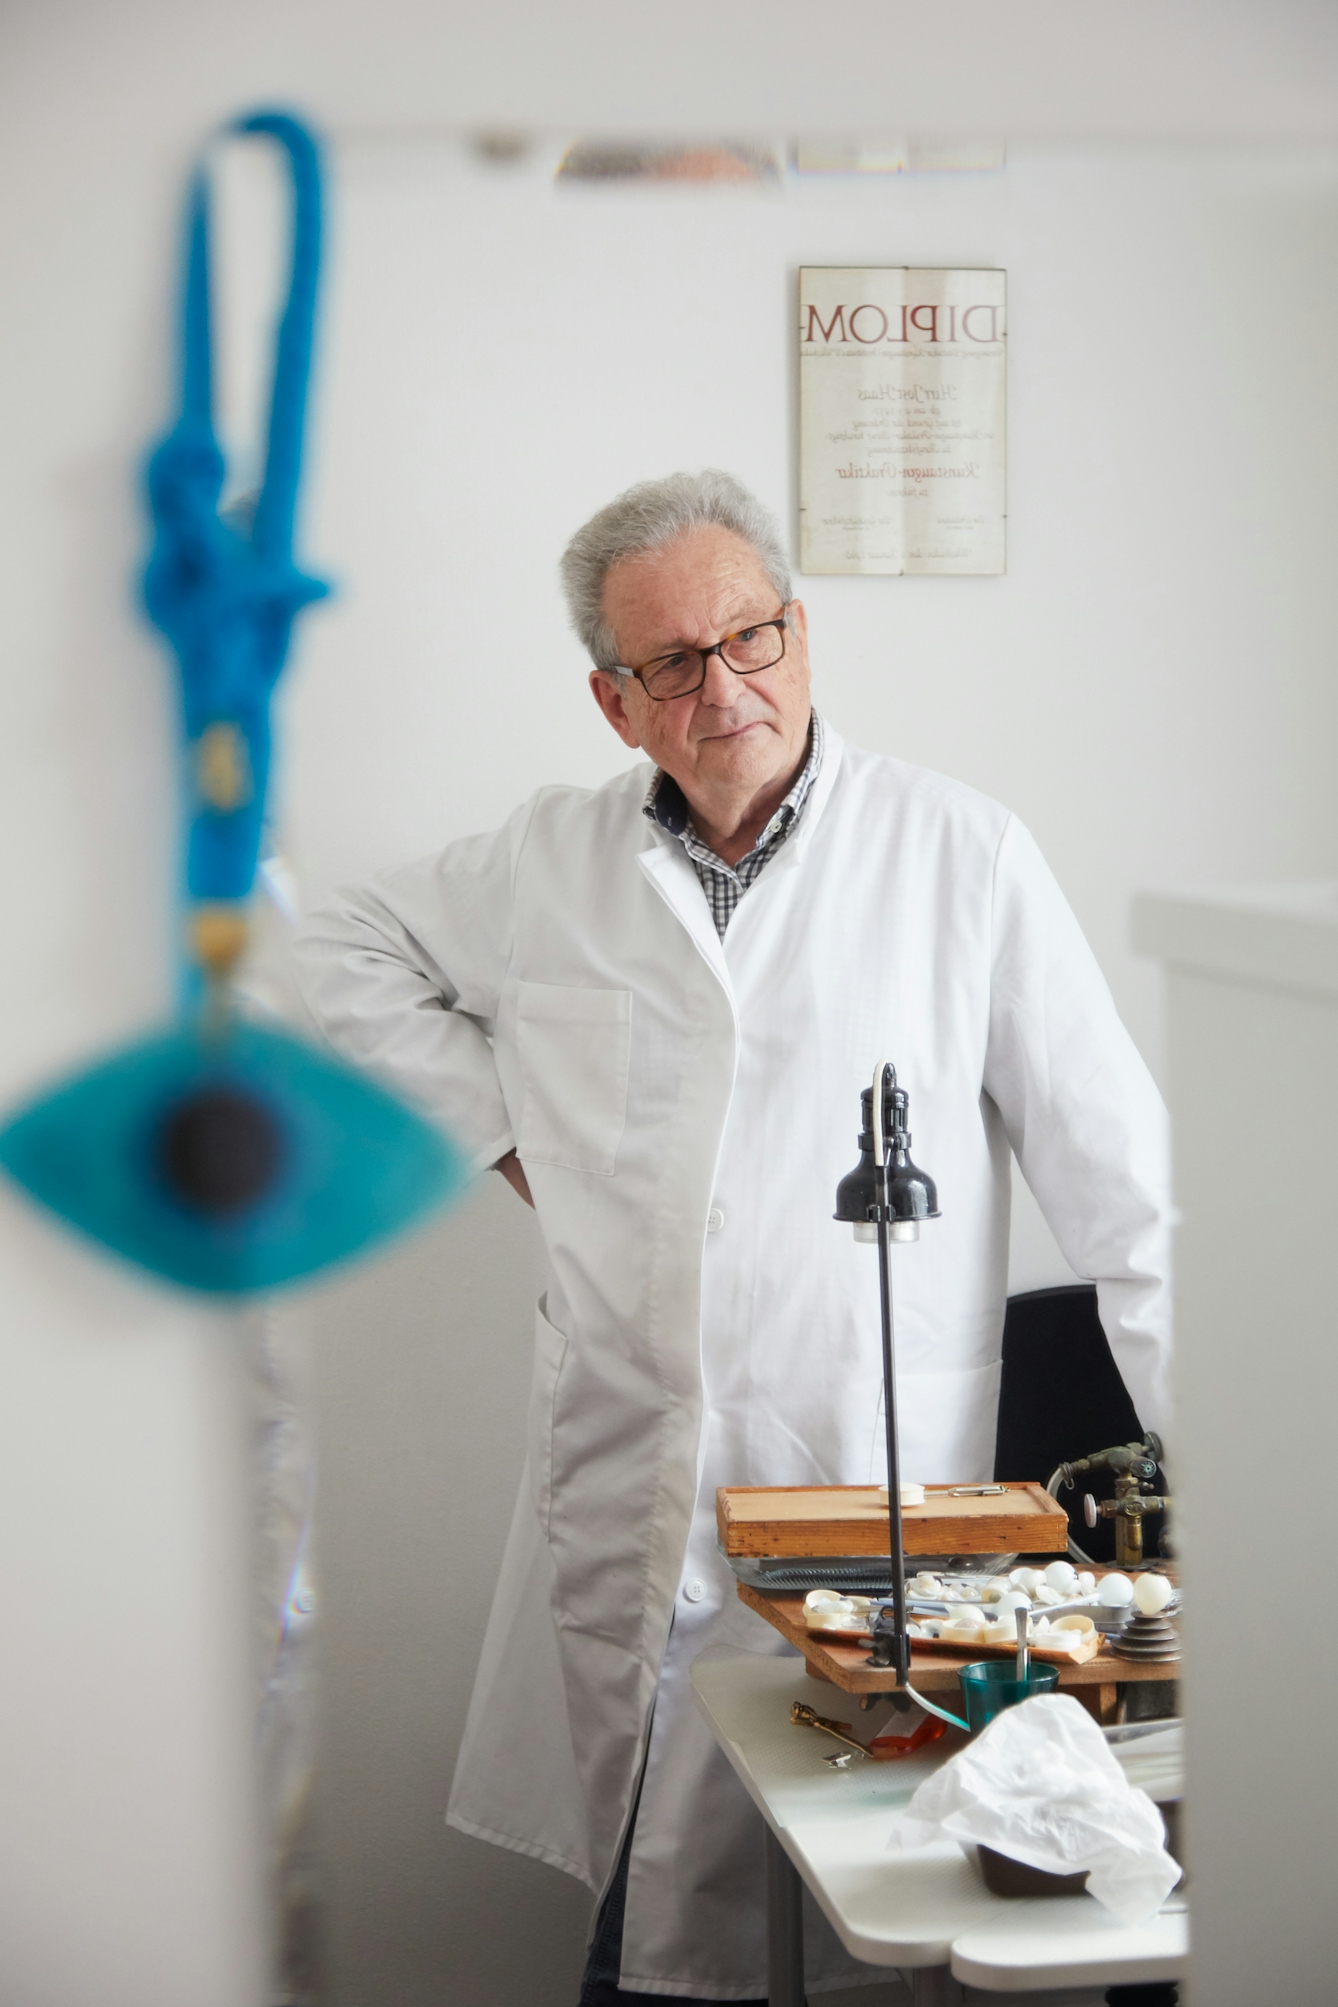 Photograph of an older man wearing a white lab coat in the reflection of a mirror He is standing at a workbench with covered in tools and glass eyes, with his hand on his hip, looking off into the distance. Hung on the corner of the mirror is a blue eye on a blue cord.